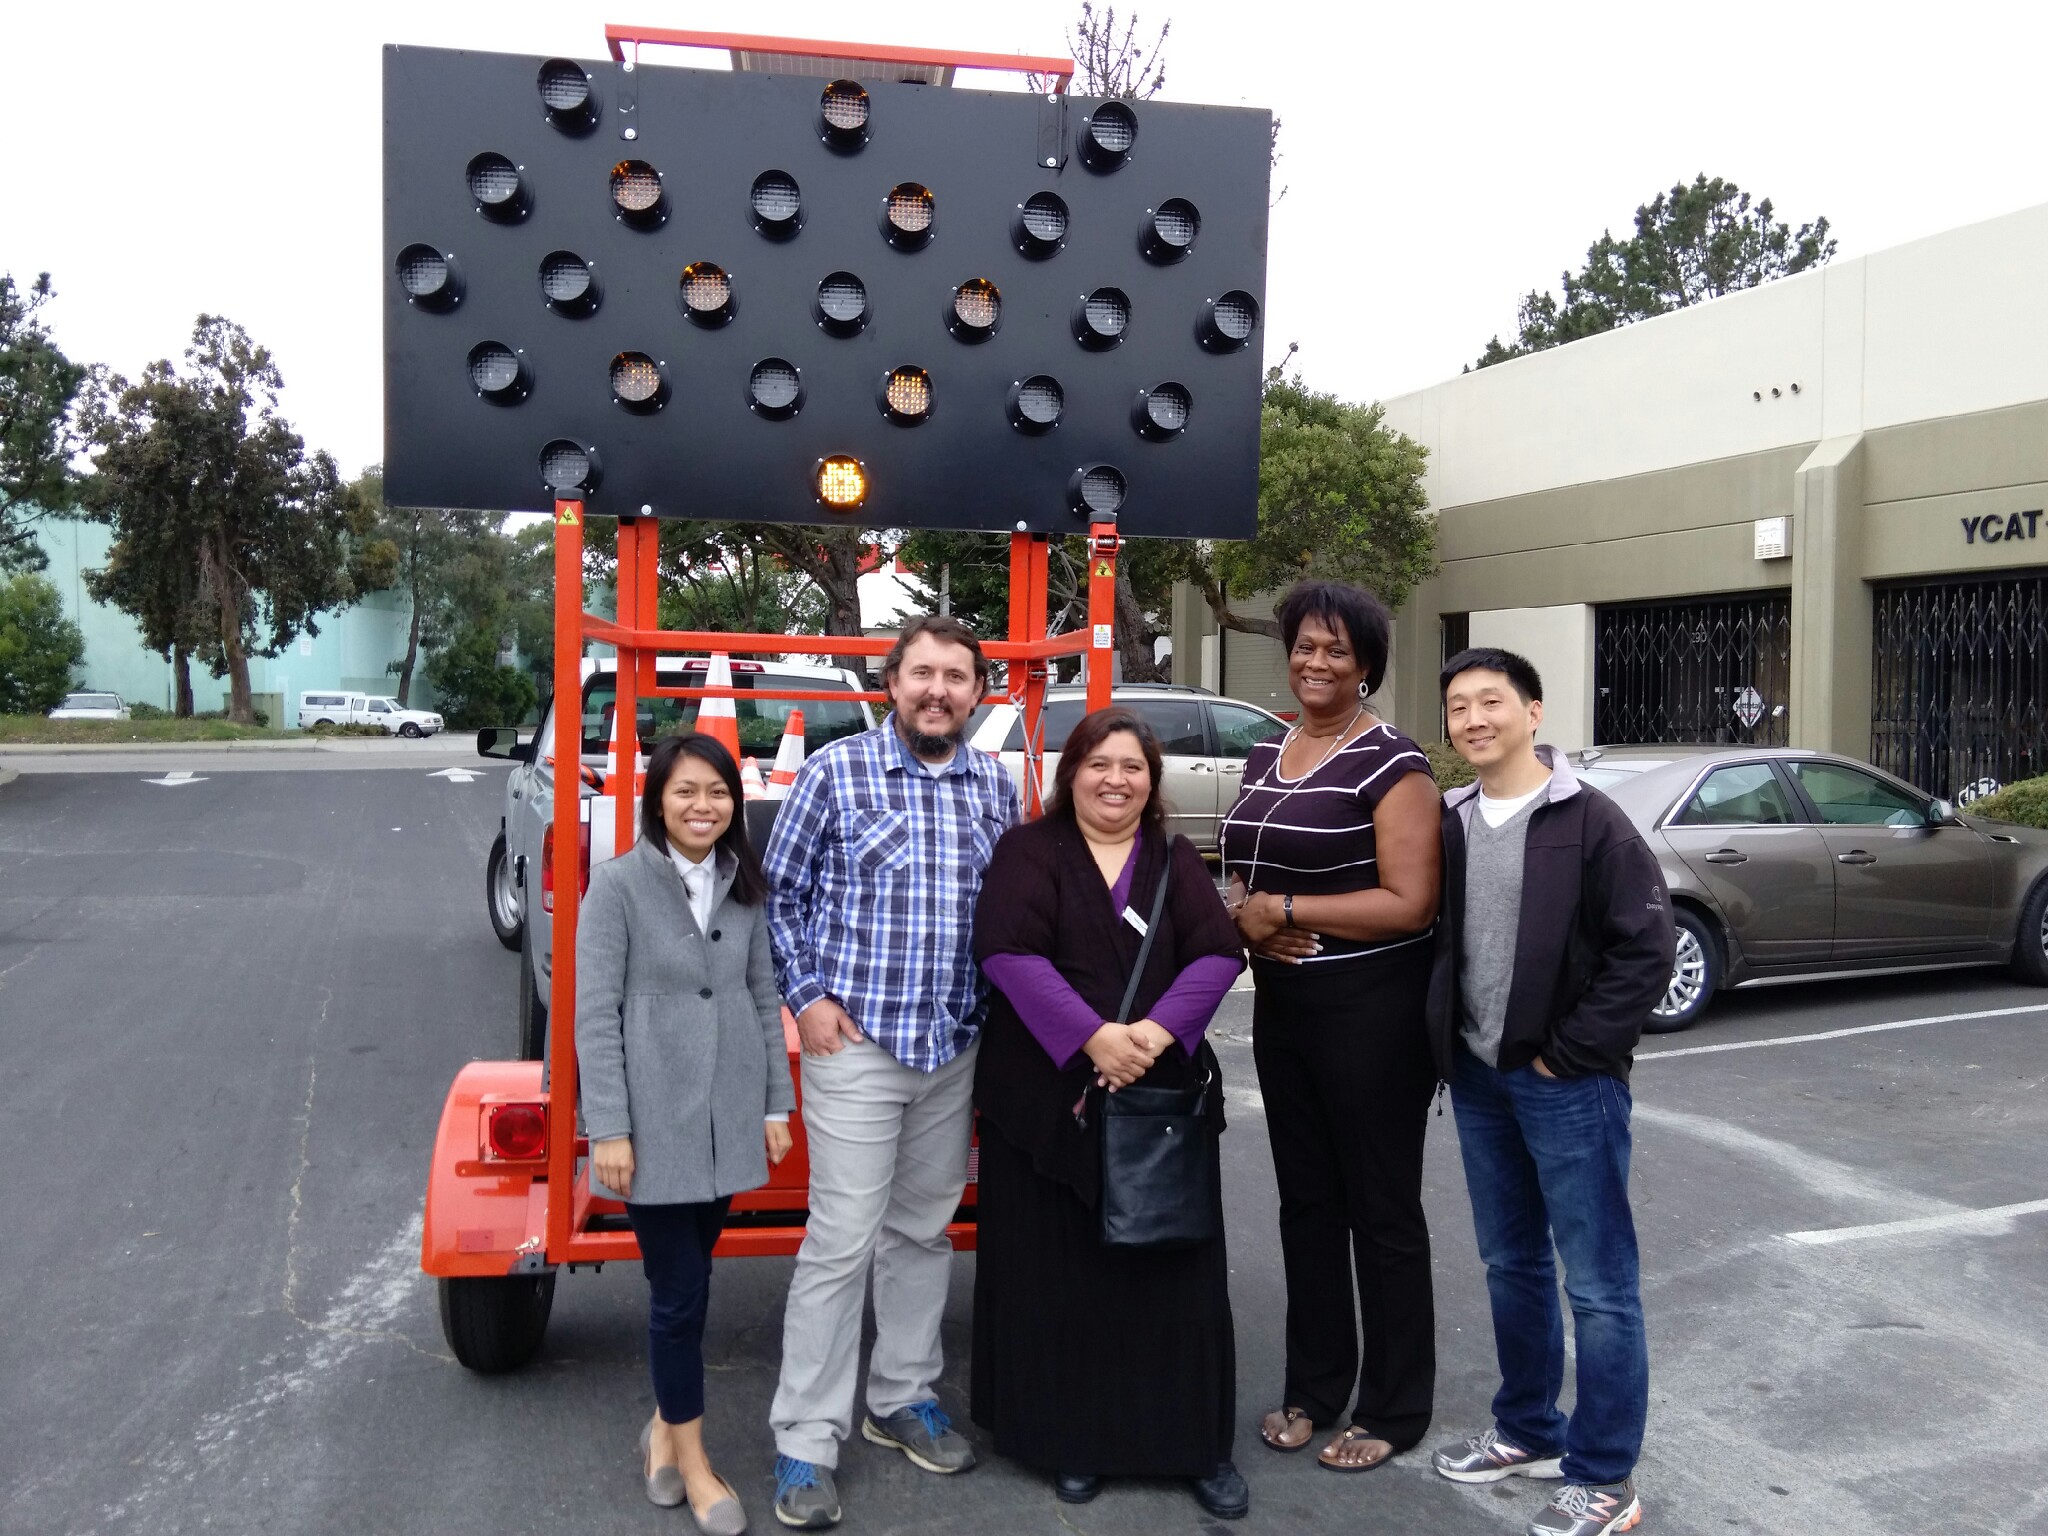   Yolanda Jones YCAT-C Construction Management    Loan Uses: Solar-powered signboard for use with CPMC Van Ness Contract 